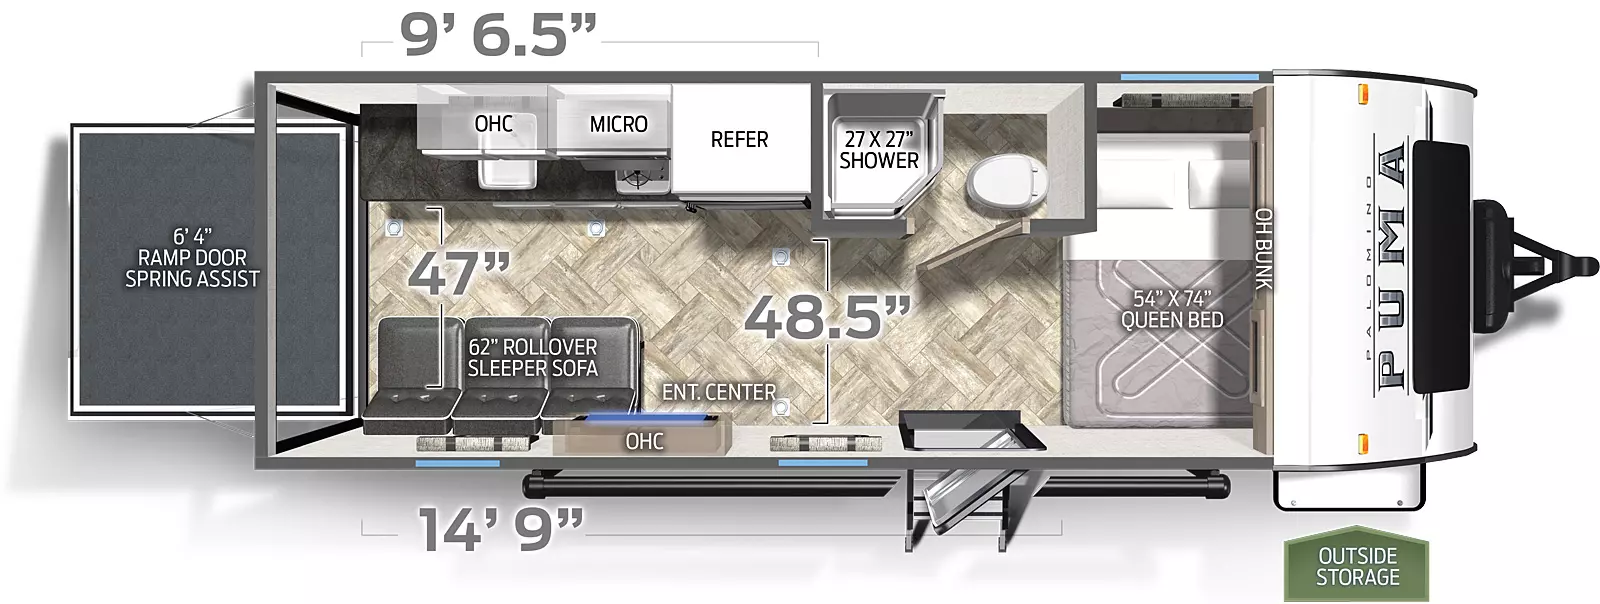 The 187TH has no slide outs. Exterior features include a 14 foot awning. Interior layout from the front to back: queen bed with end table; full bathroom; kitchen with refrigerator and cooktop; entertainment center; two rollover sleeper sofa's on either side of the trailer; ramp door.
